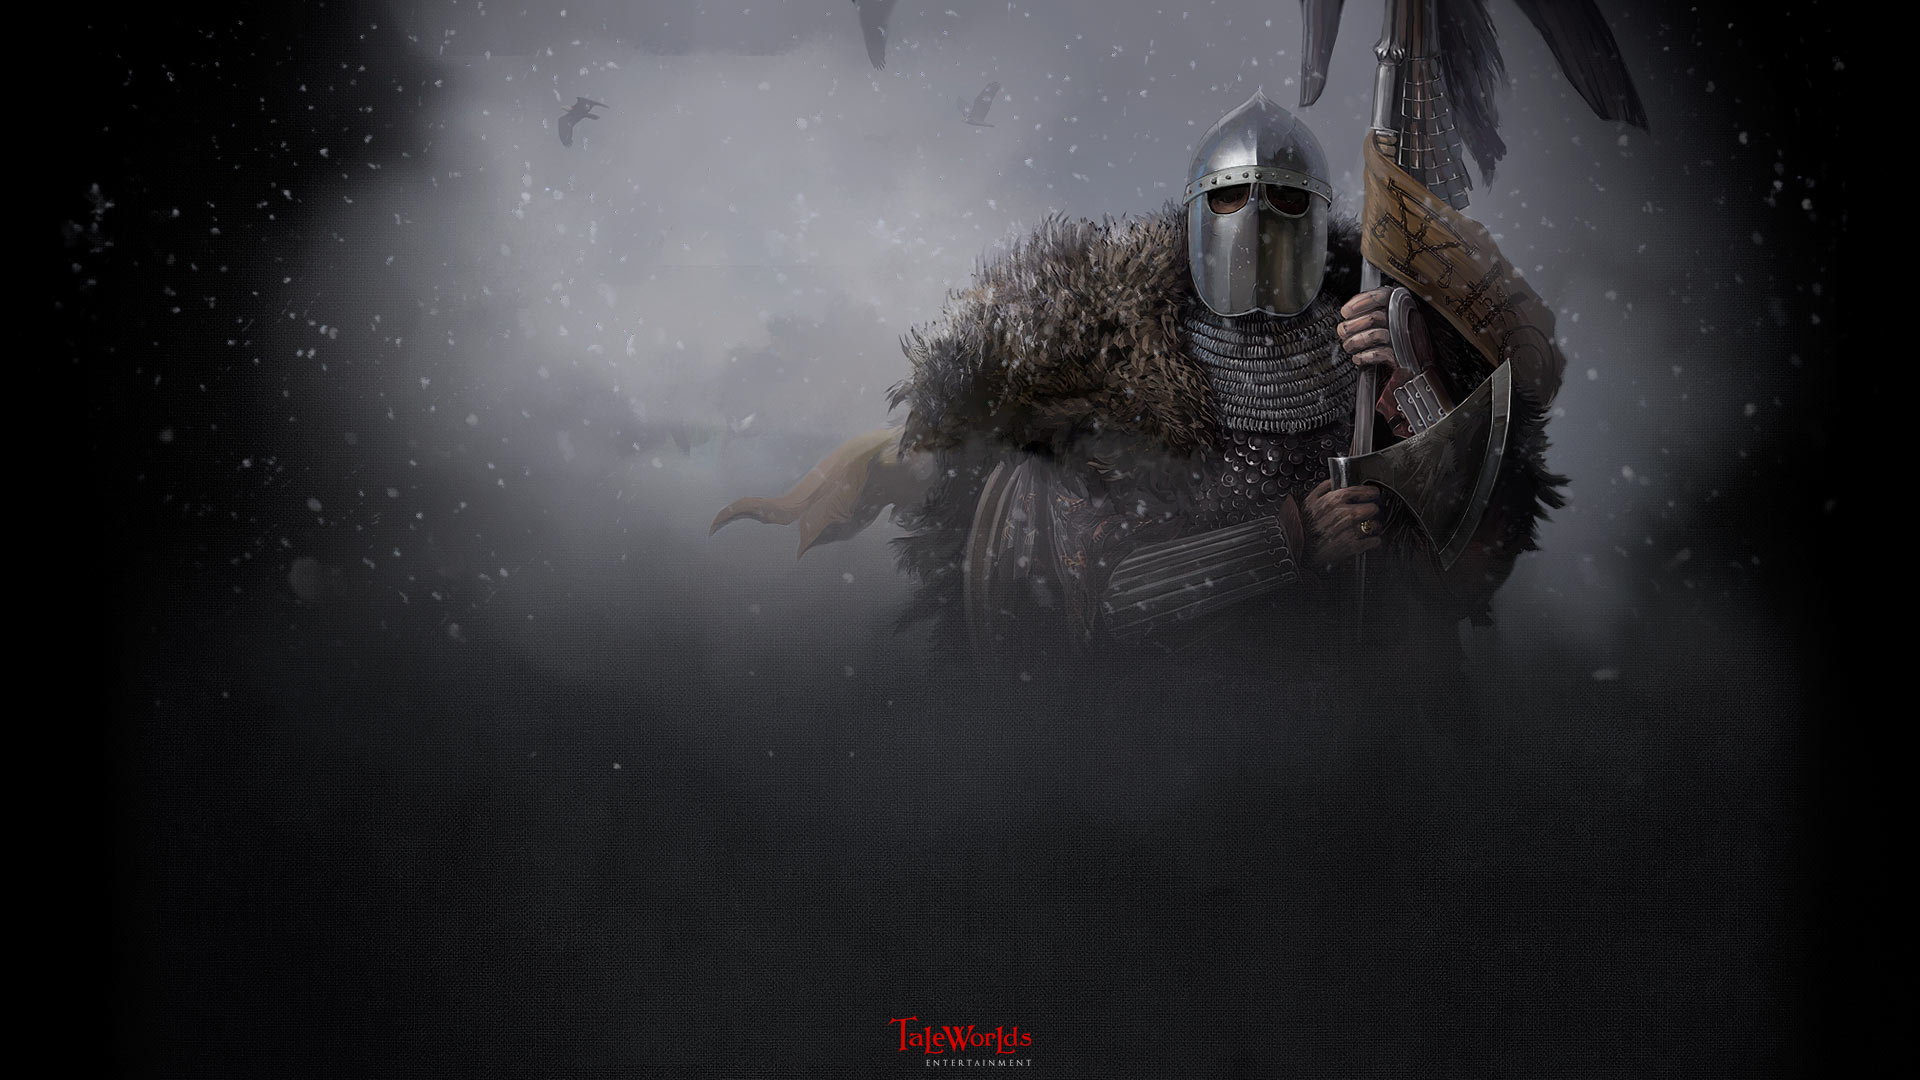  Feed Report media [unofficial] Bannerlord wallpapers view original